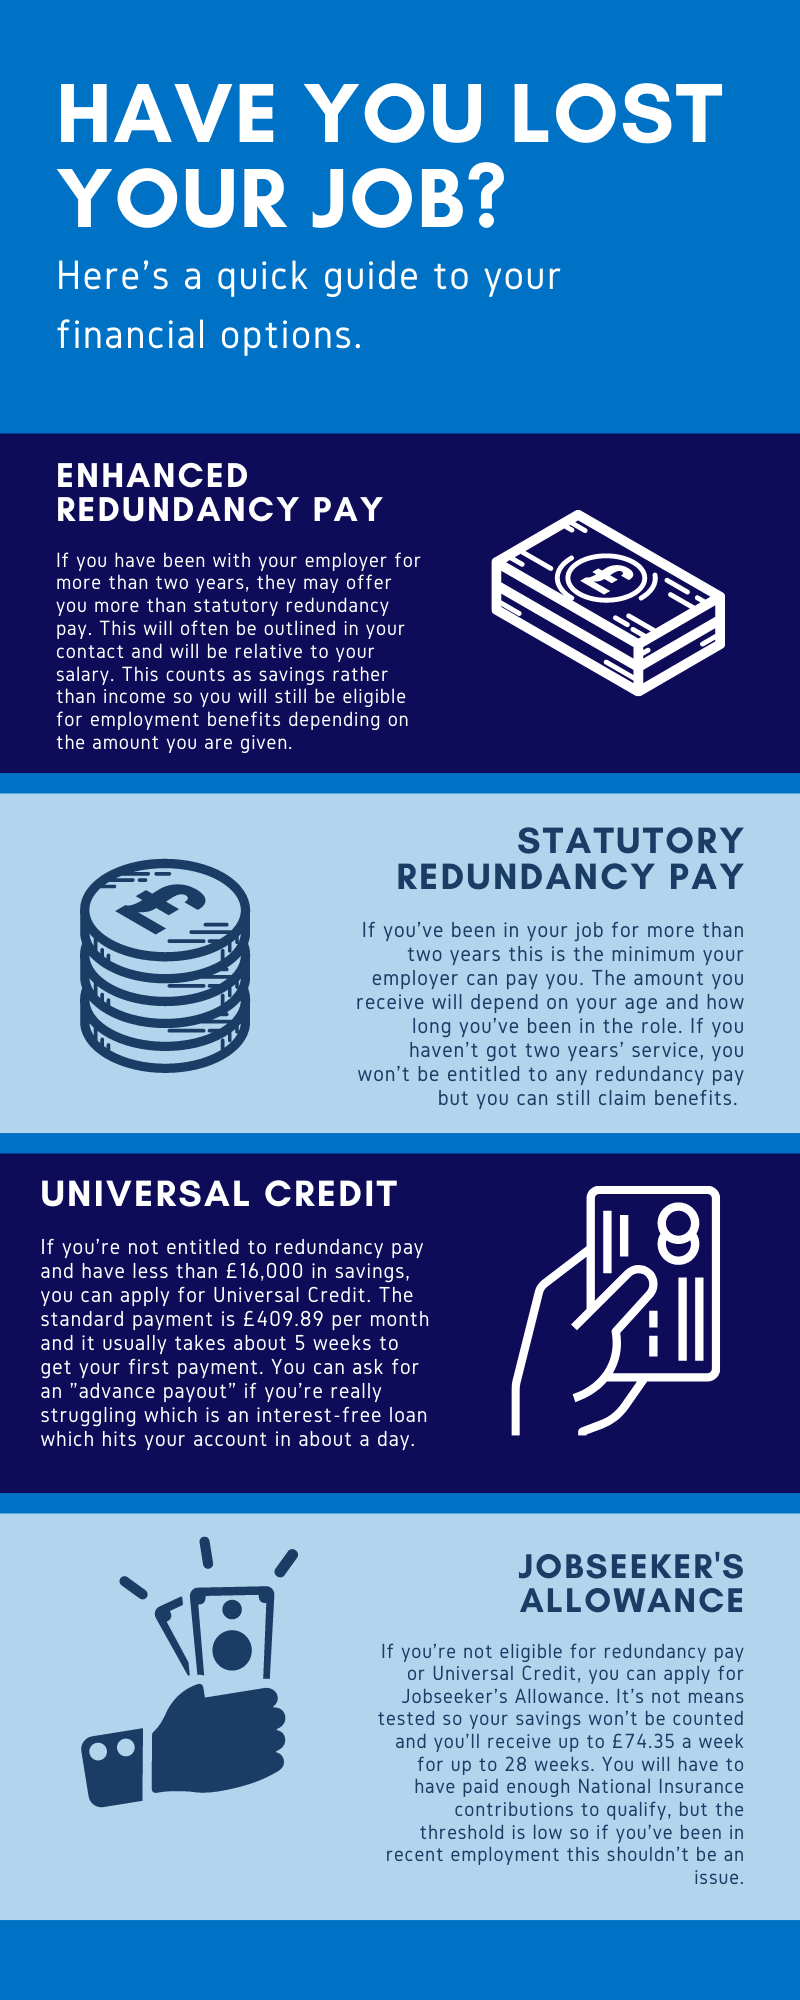 A quick guide to your financial options after redundancy